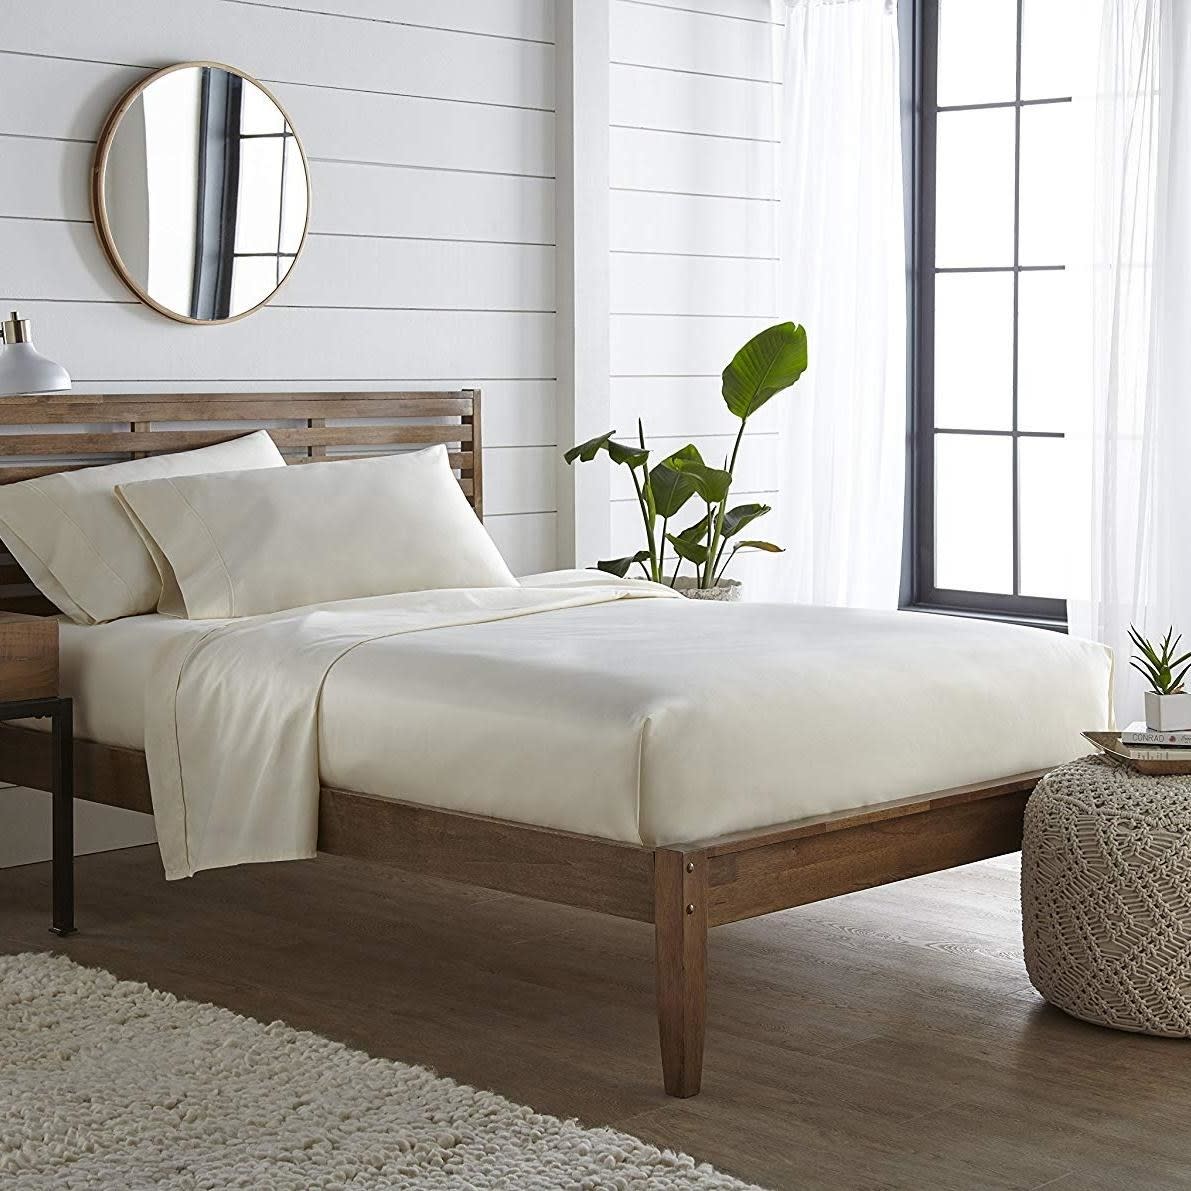 The Best Bedding and Mattresses on Sale During Amazon Prime Day